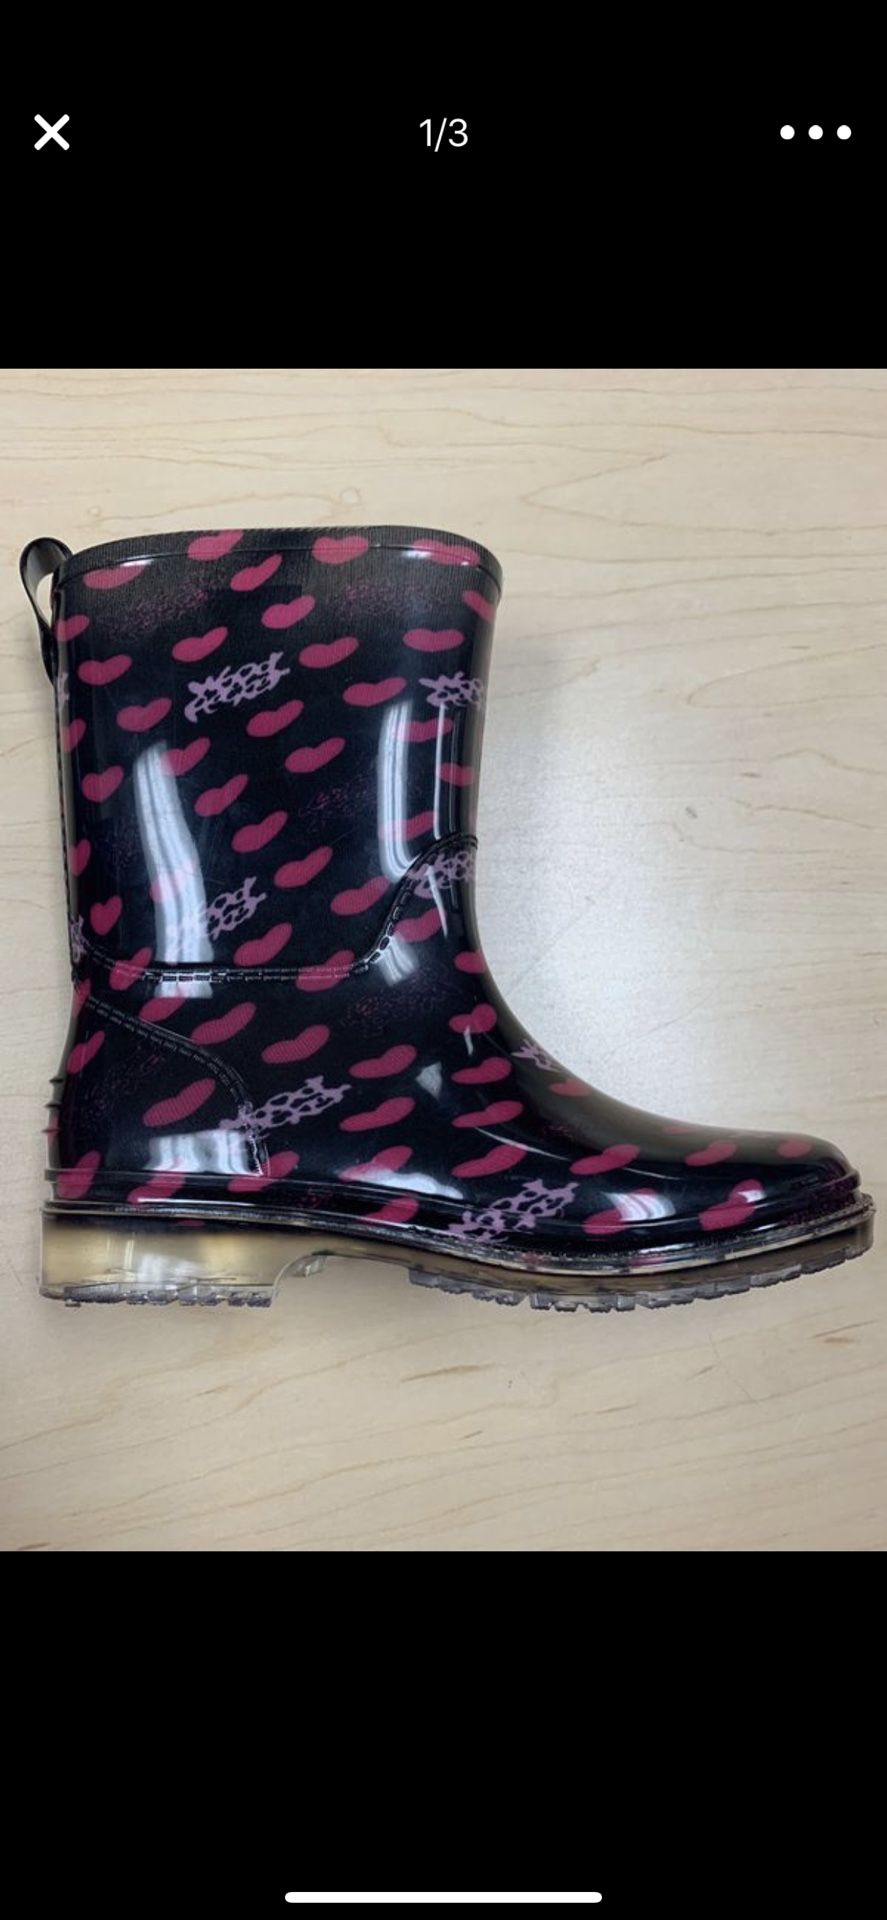 Rain boots for girls size: 11 kids sizes